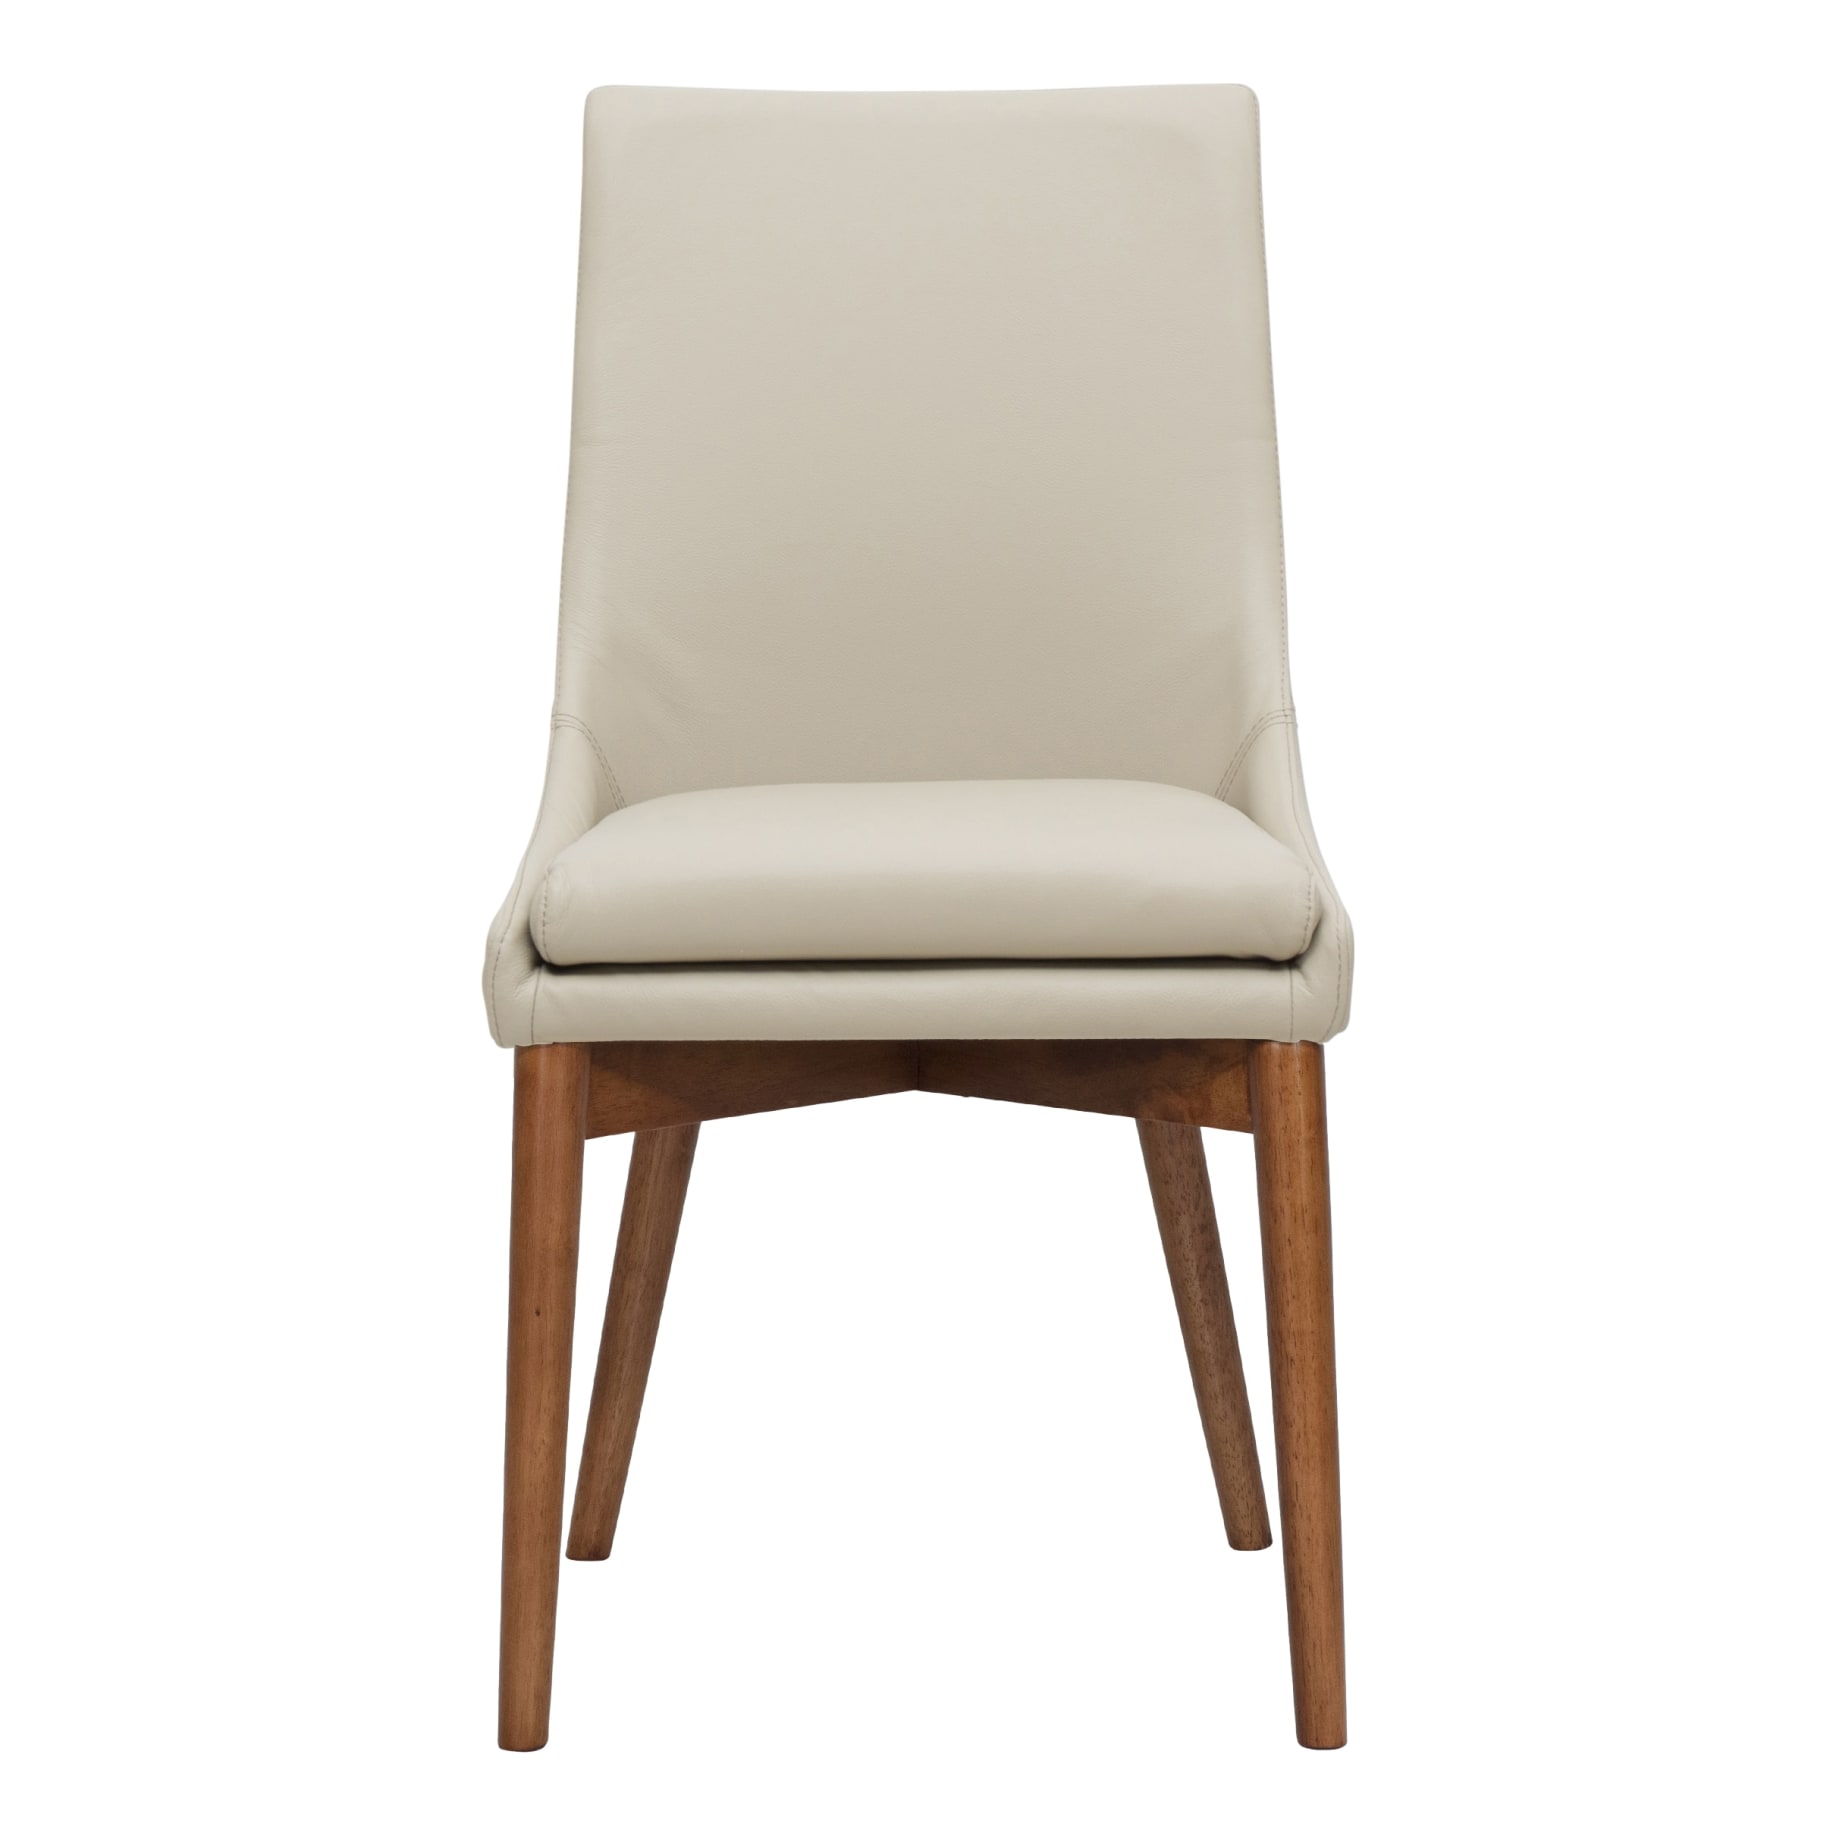 Highland Dining Chair in Leather Mocha / Blackwood Stain